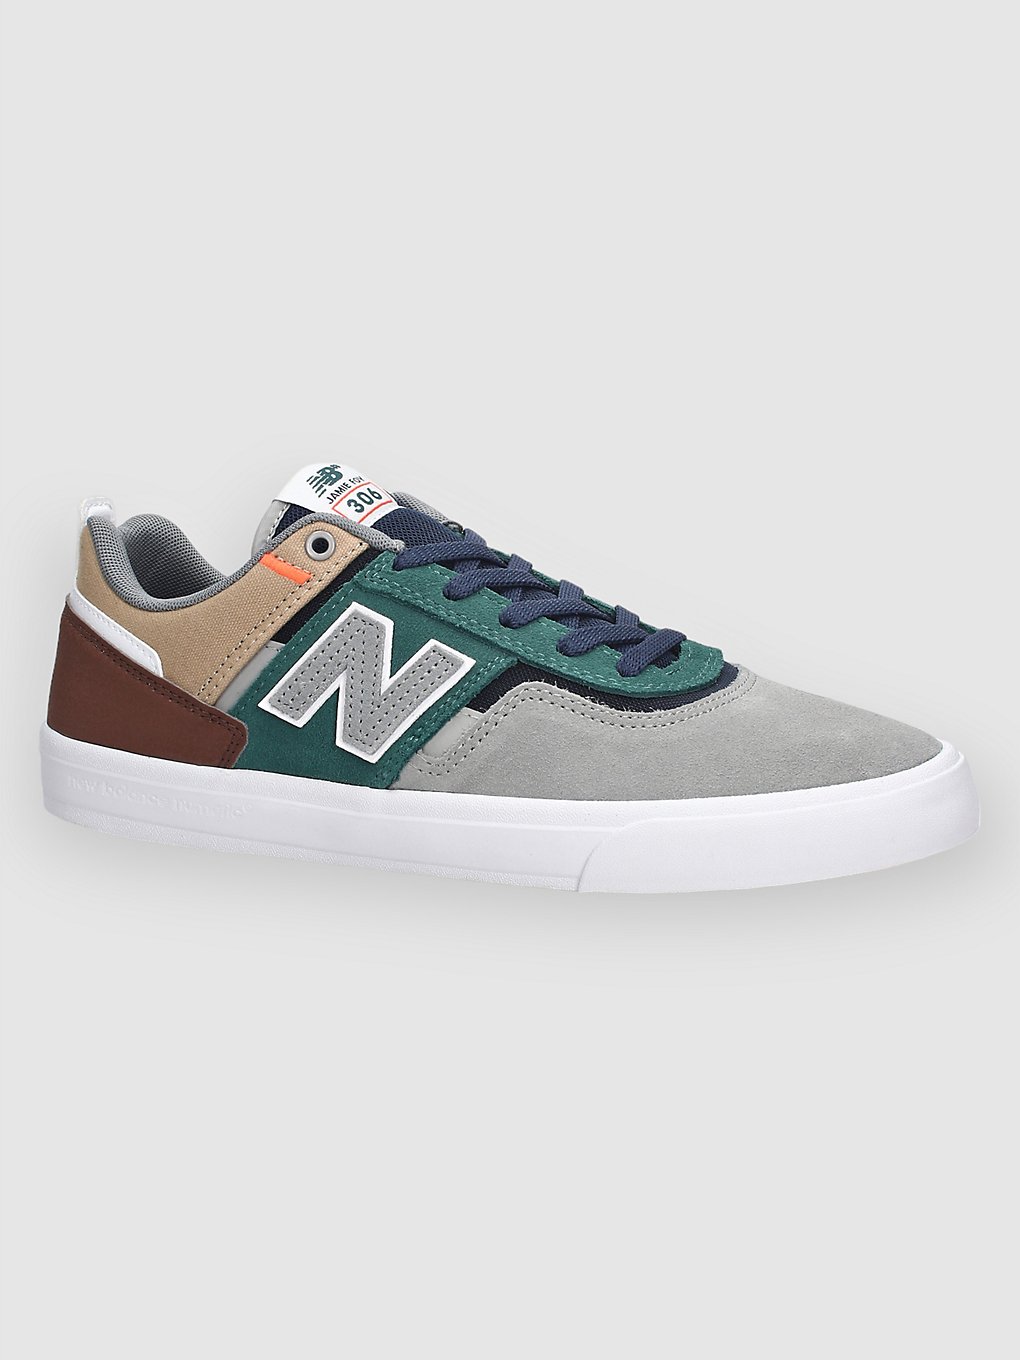 New Balance NM306FIF Skate Shoes teal kaufen